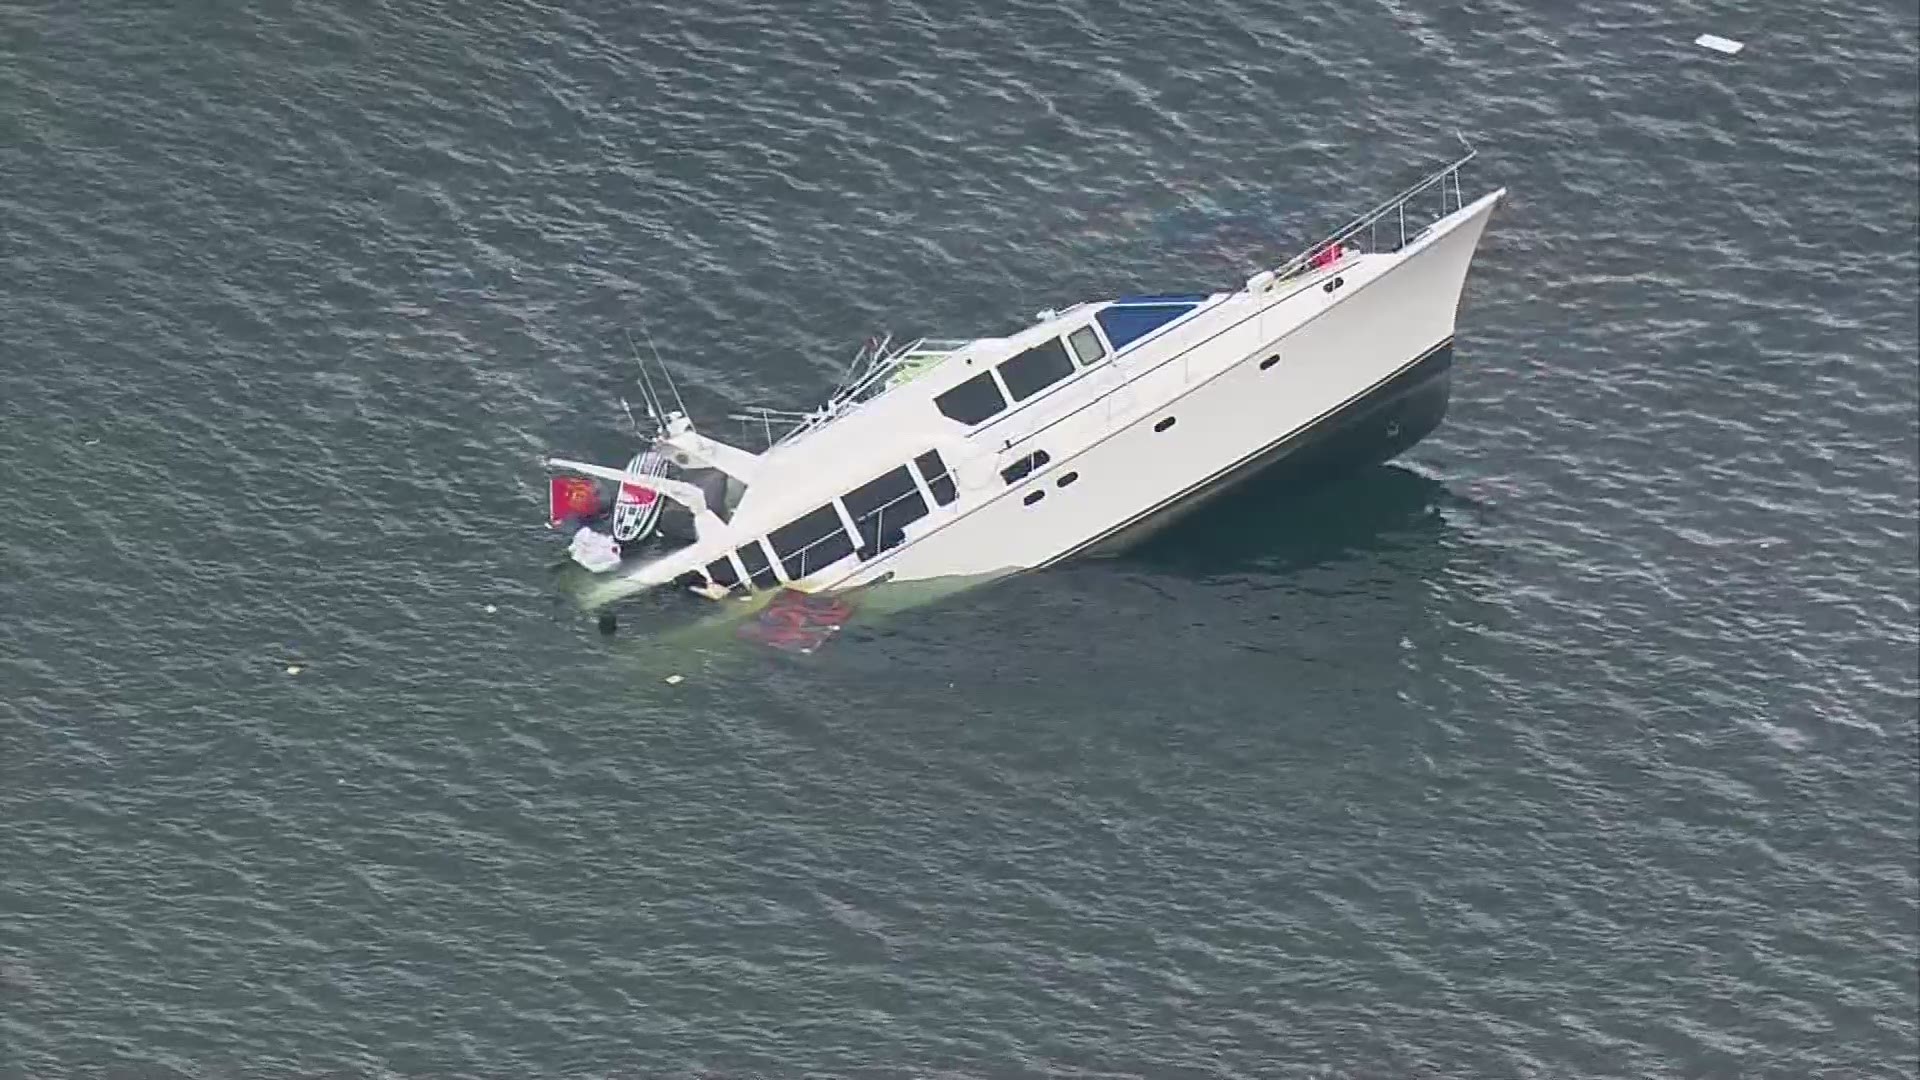 65-foot boat started sinking 1.3 miles SW of the Hood Canal Bridge. The Coast Guard says 8 people self-rescued from the boat's dinghy and made it safely to shore. The Coast Guard attempted to "de-water" the boat, but now say the yacht is expected to sink in 1,080 feet of water.